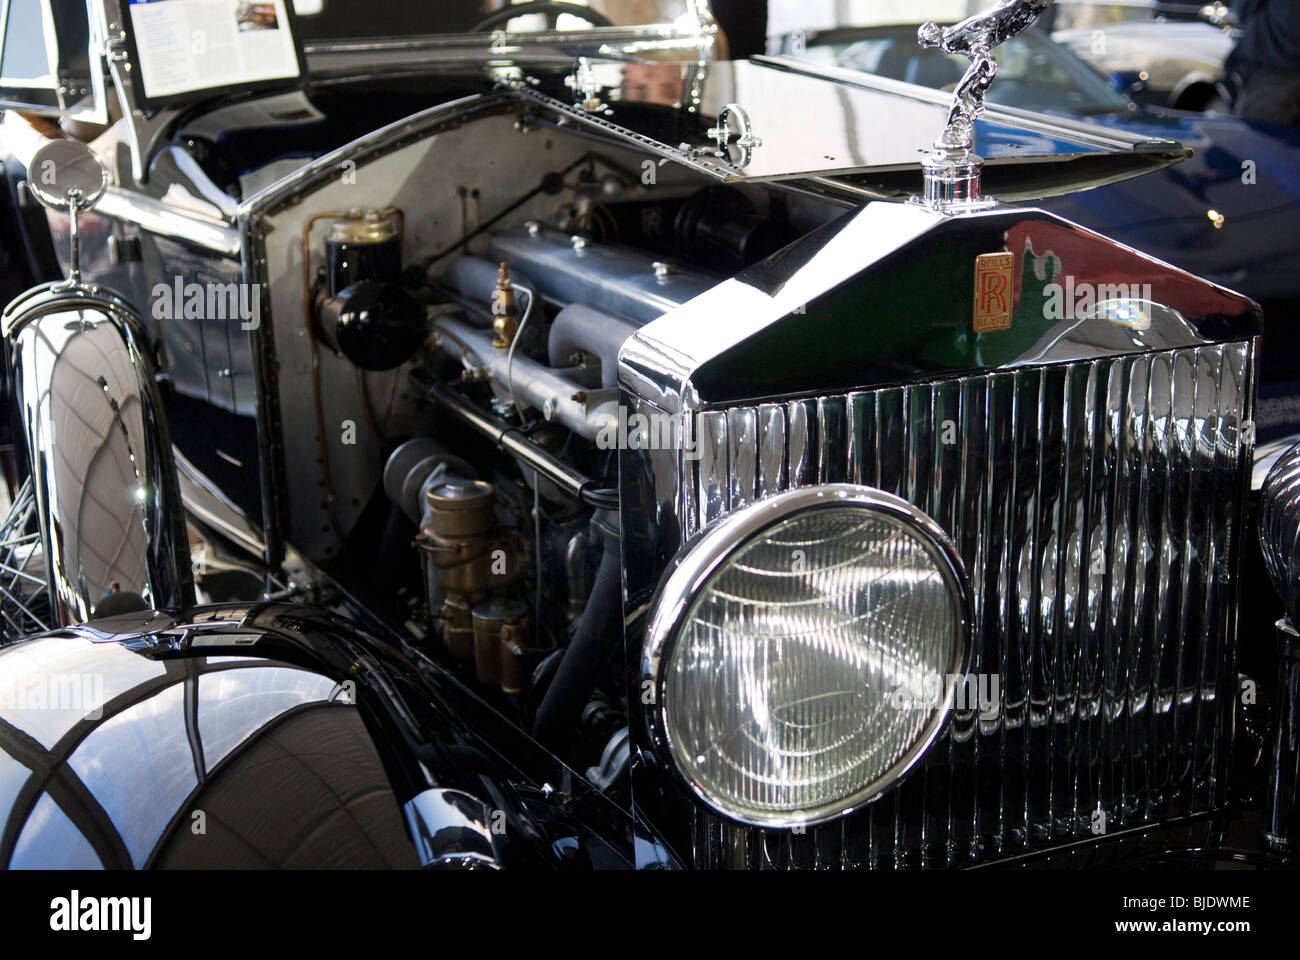 A View Of An Old Rolls Royce Phantom The Grill And Headlight With Stock Photo Alamy